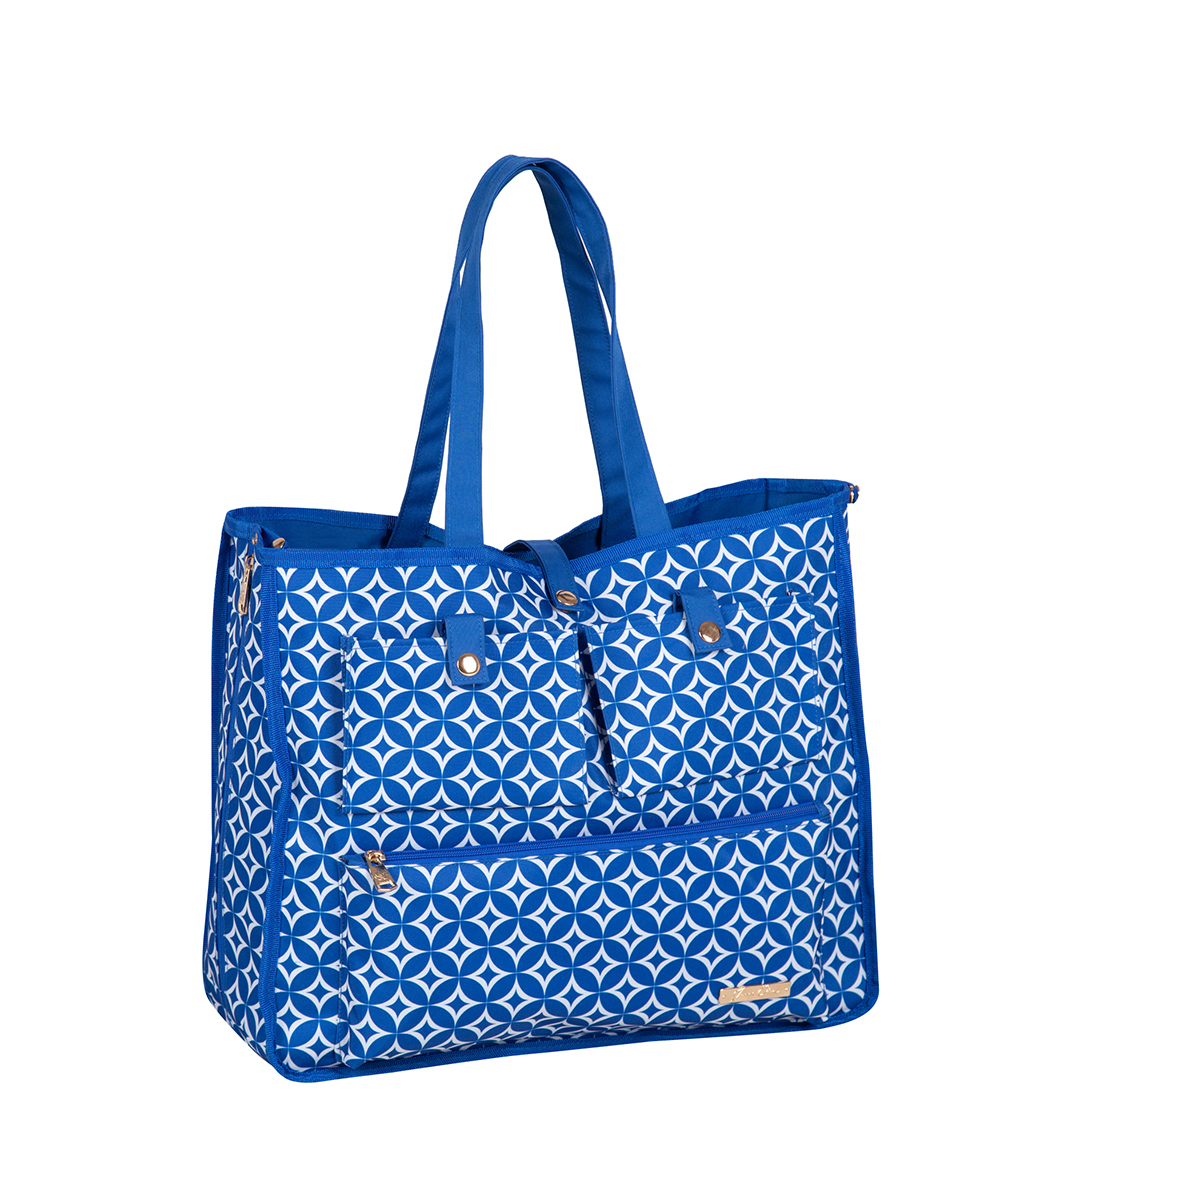 Jenni Chan Stars Reversible 2-In-1 Carry All Tote